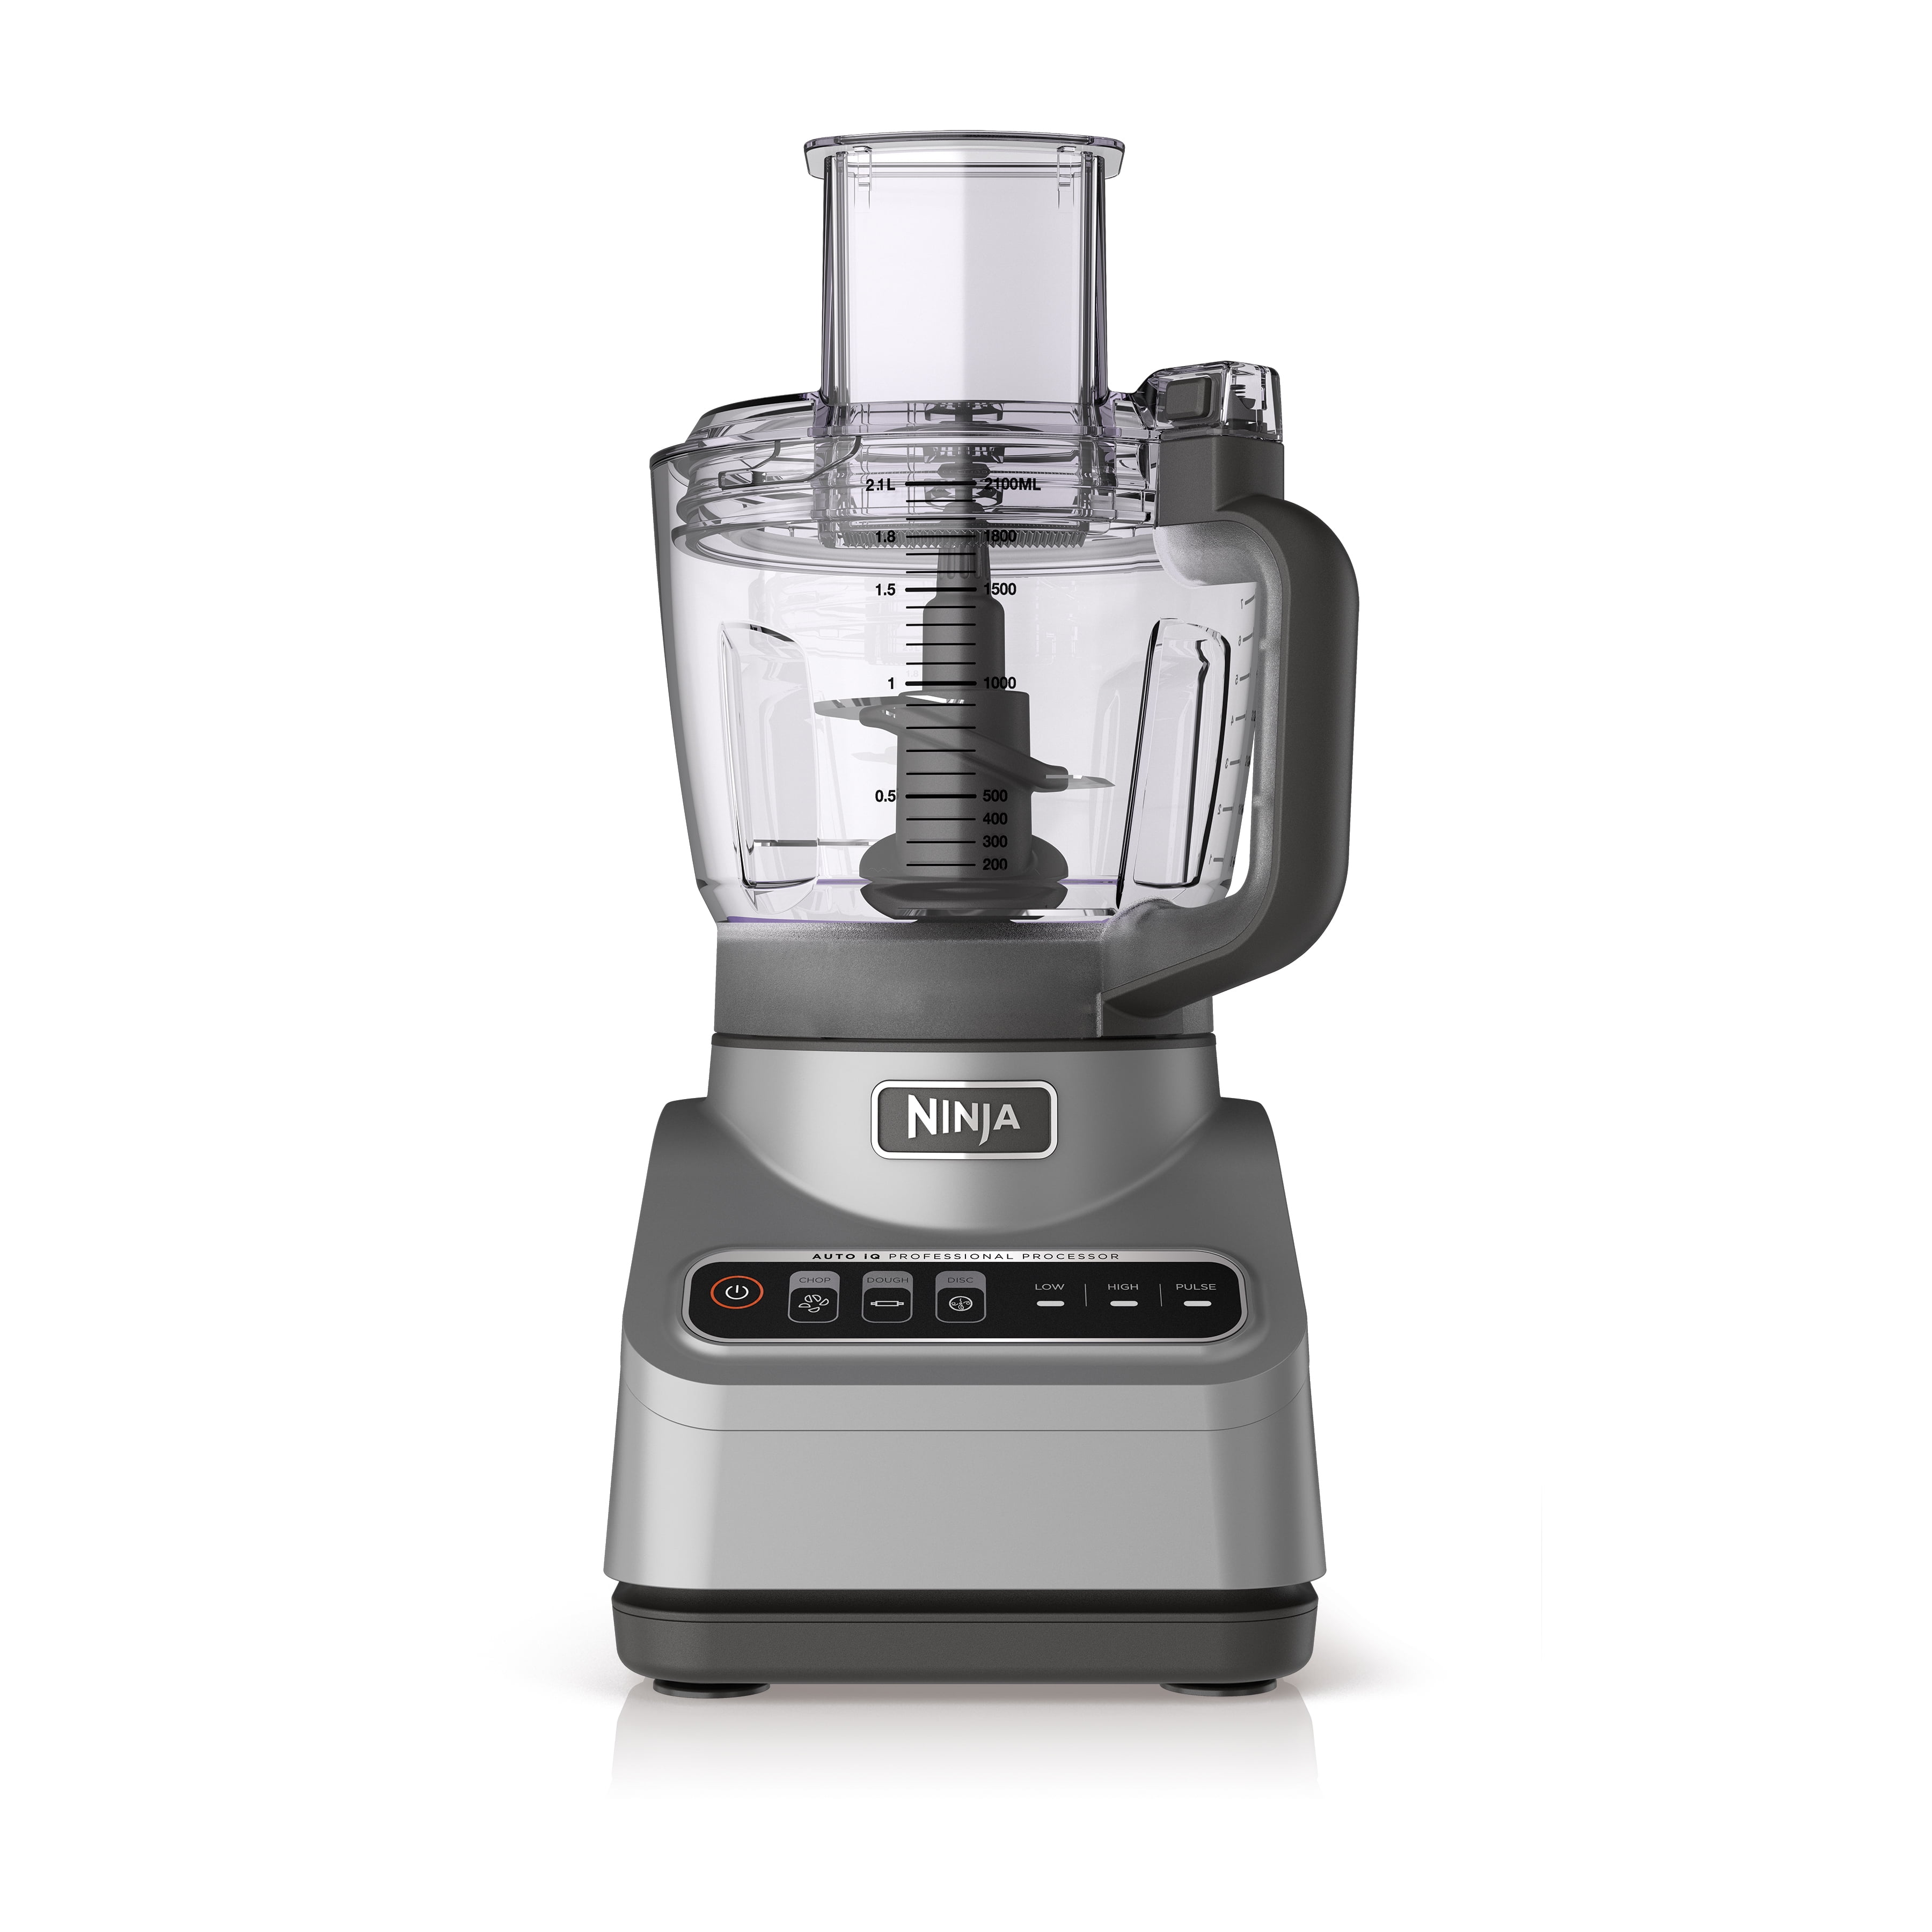 Witness our most powerful food processor ever in action: the Ninja